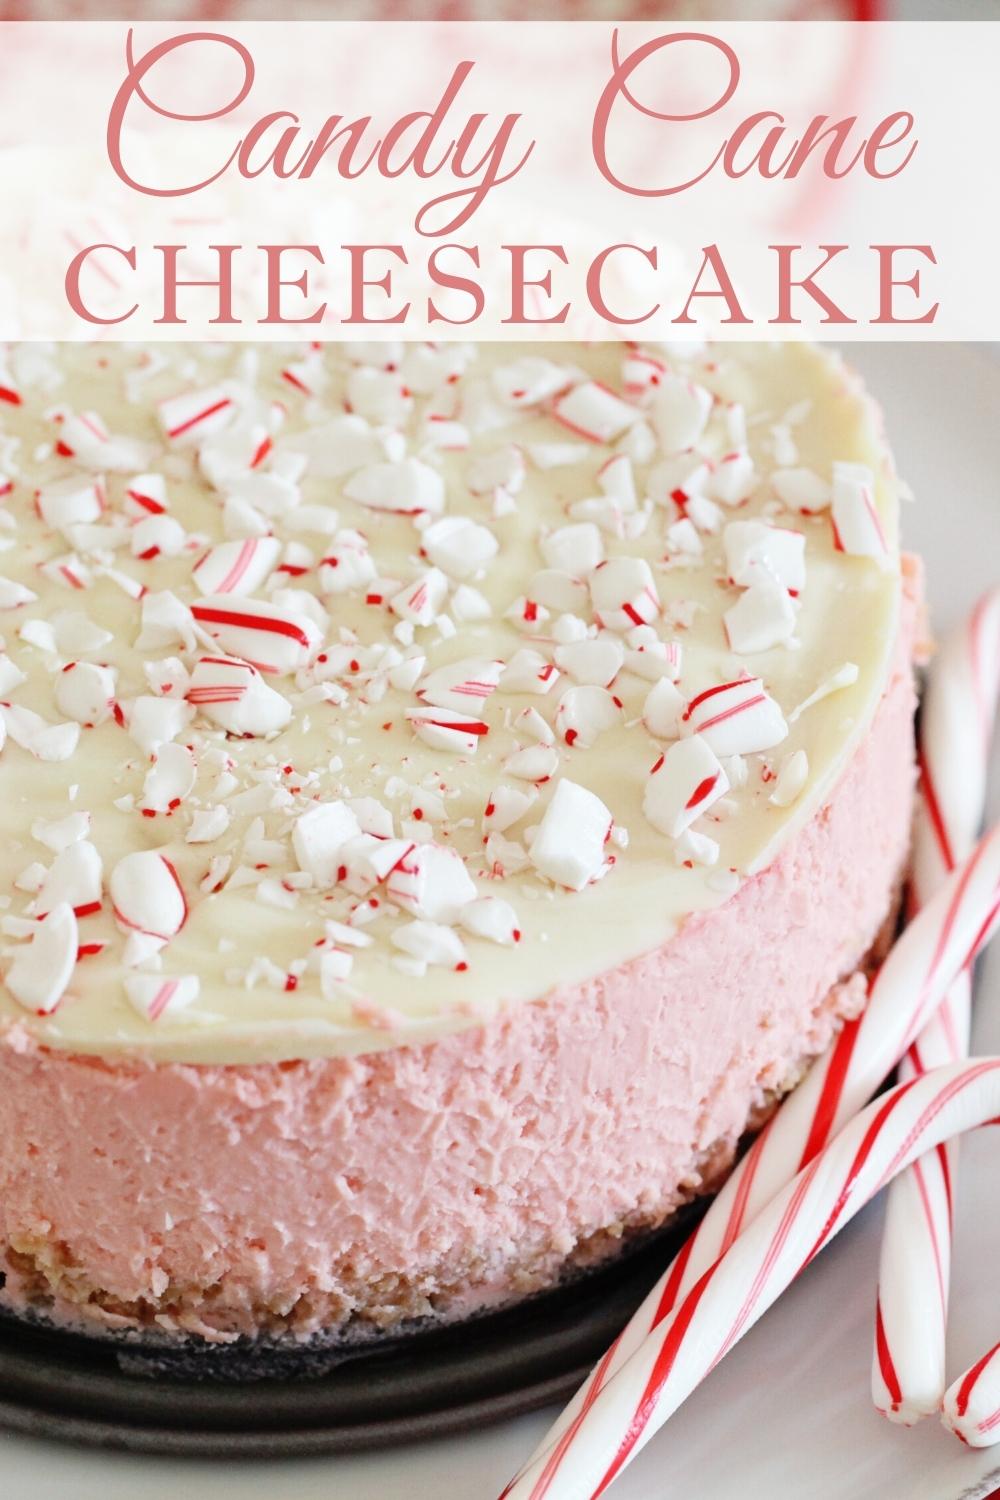 Candy Cane Cheesecake in the Instant Pot